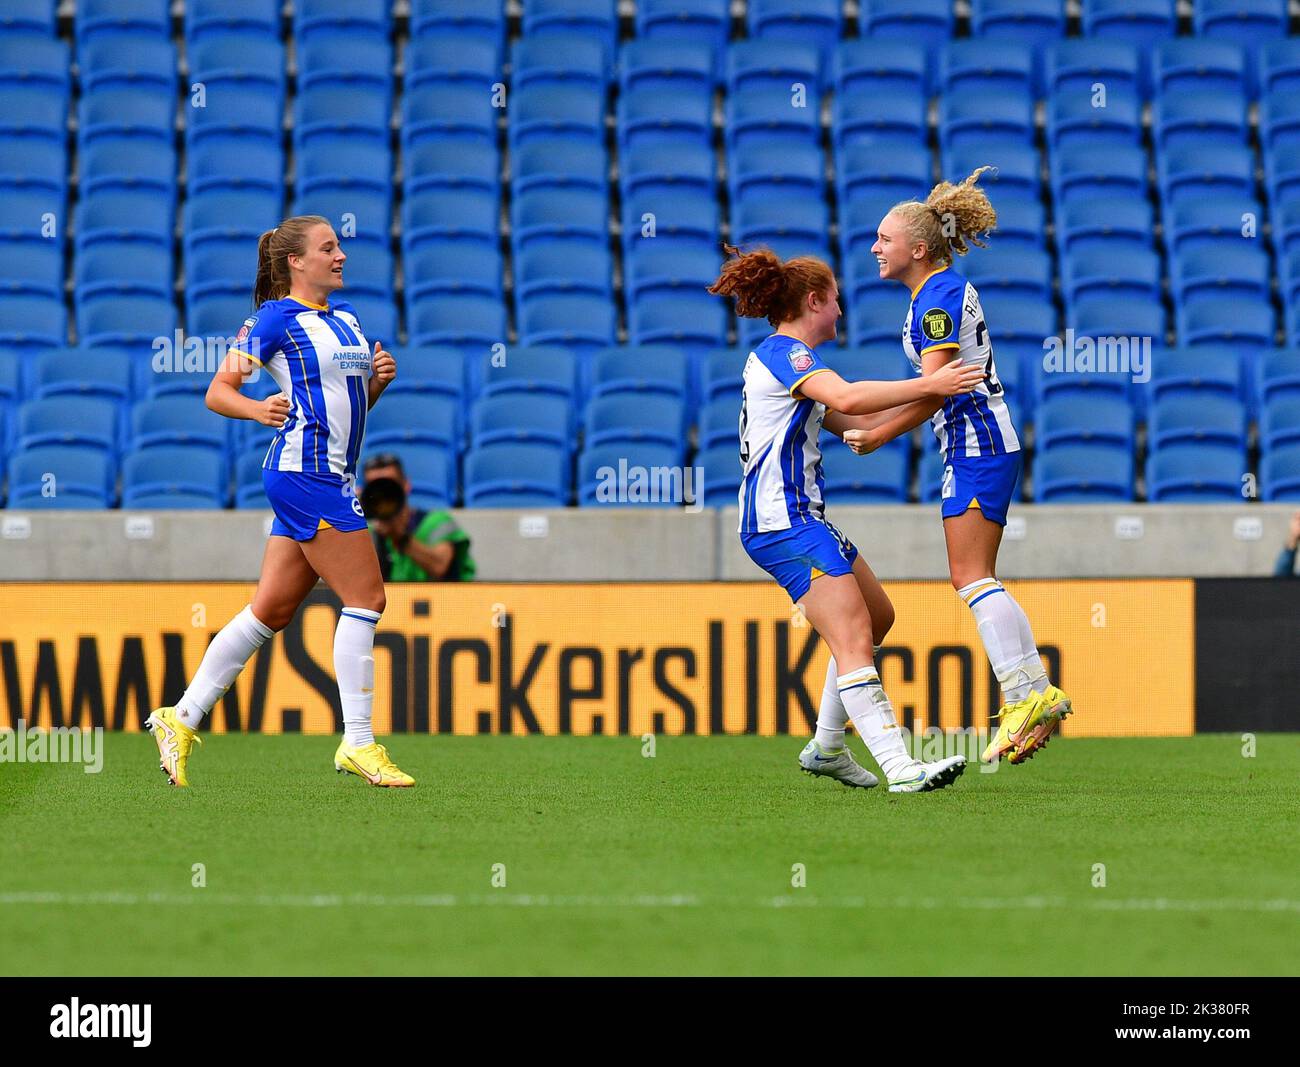 Brighton And Hove, UK. 25th Sep, 2022. Katie Robinson of Brighton and Hove Albion celebrates scoring during the FA Women's Super League match between Brighton & Hove Albion Women and Reading Women at American Express Community Stadium on September 25th 2022 in Brighton and Hove, United Kingdom. (Photo by Jeff Mood/phcimages.com) Credit: PHC Images/Alamy Live News Stock Photo